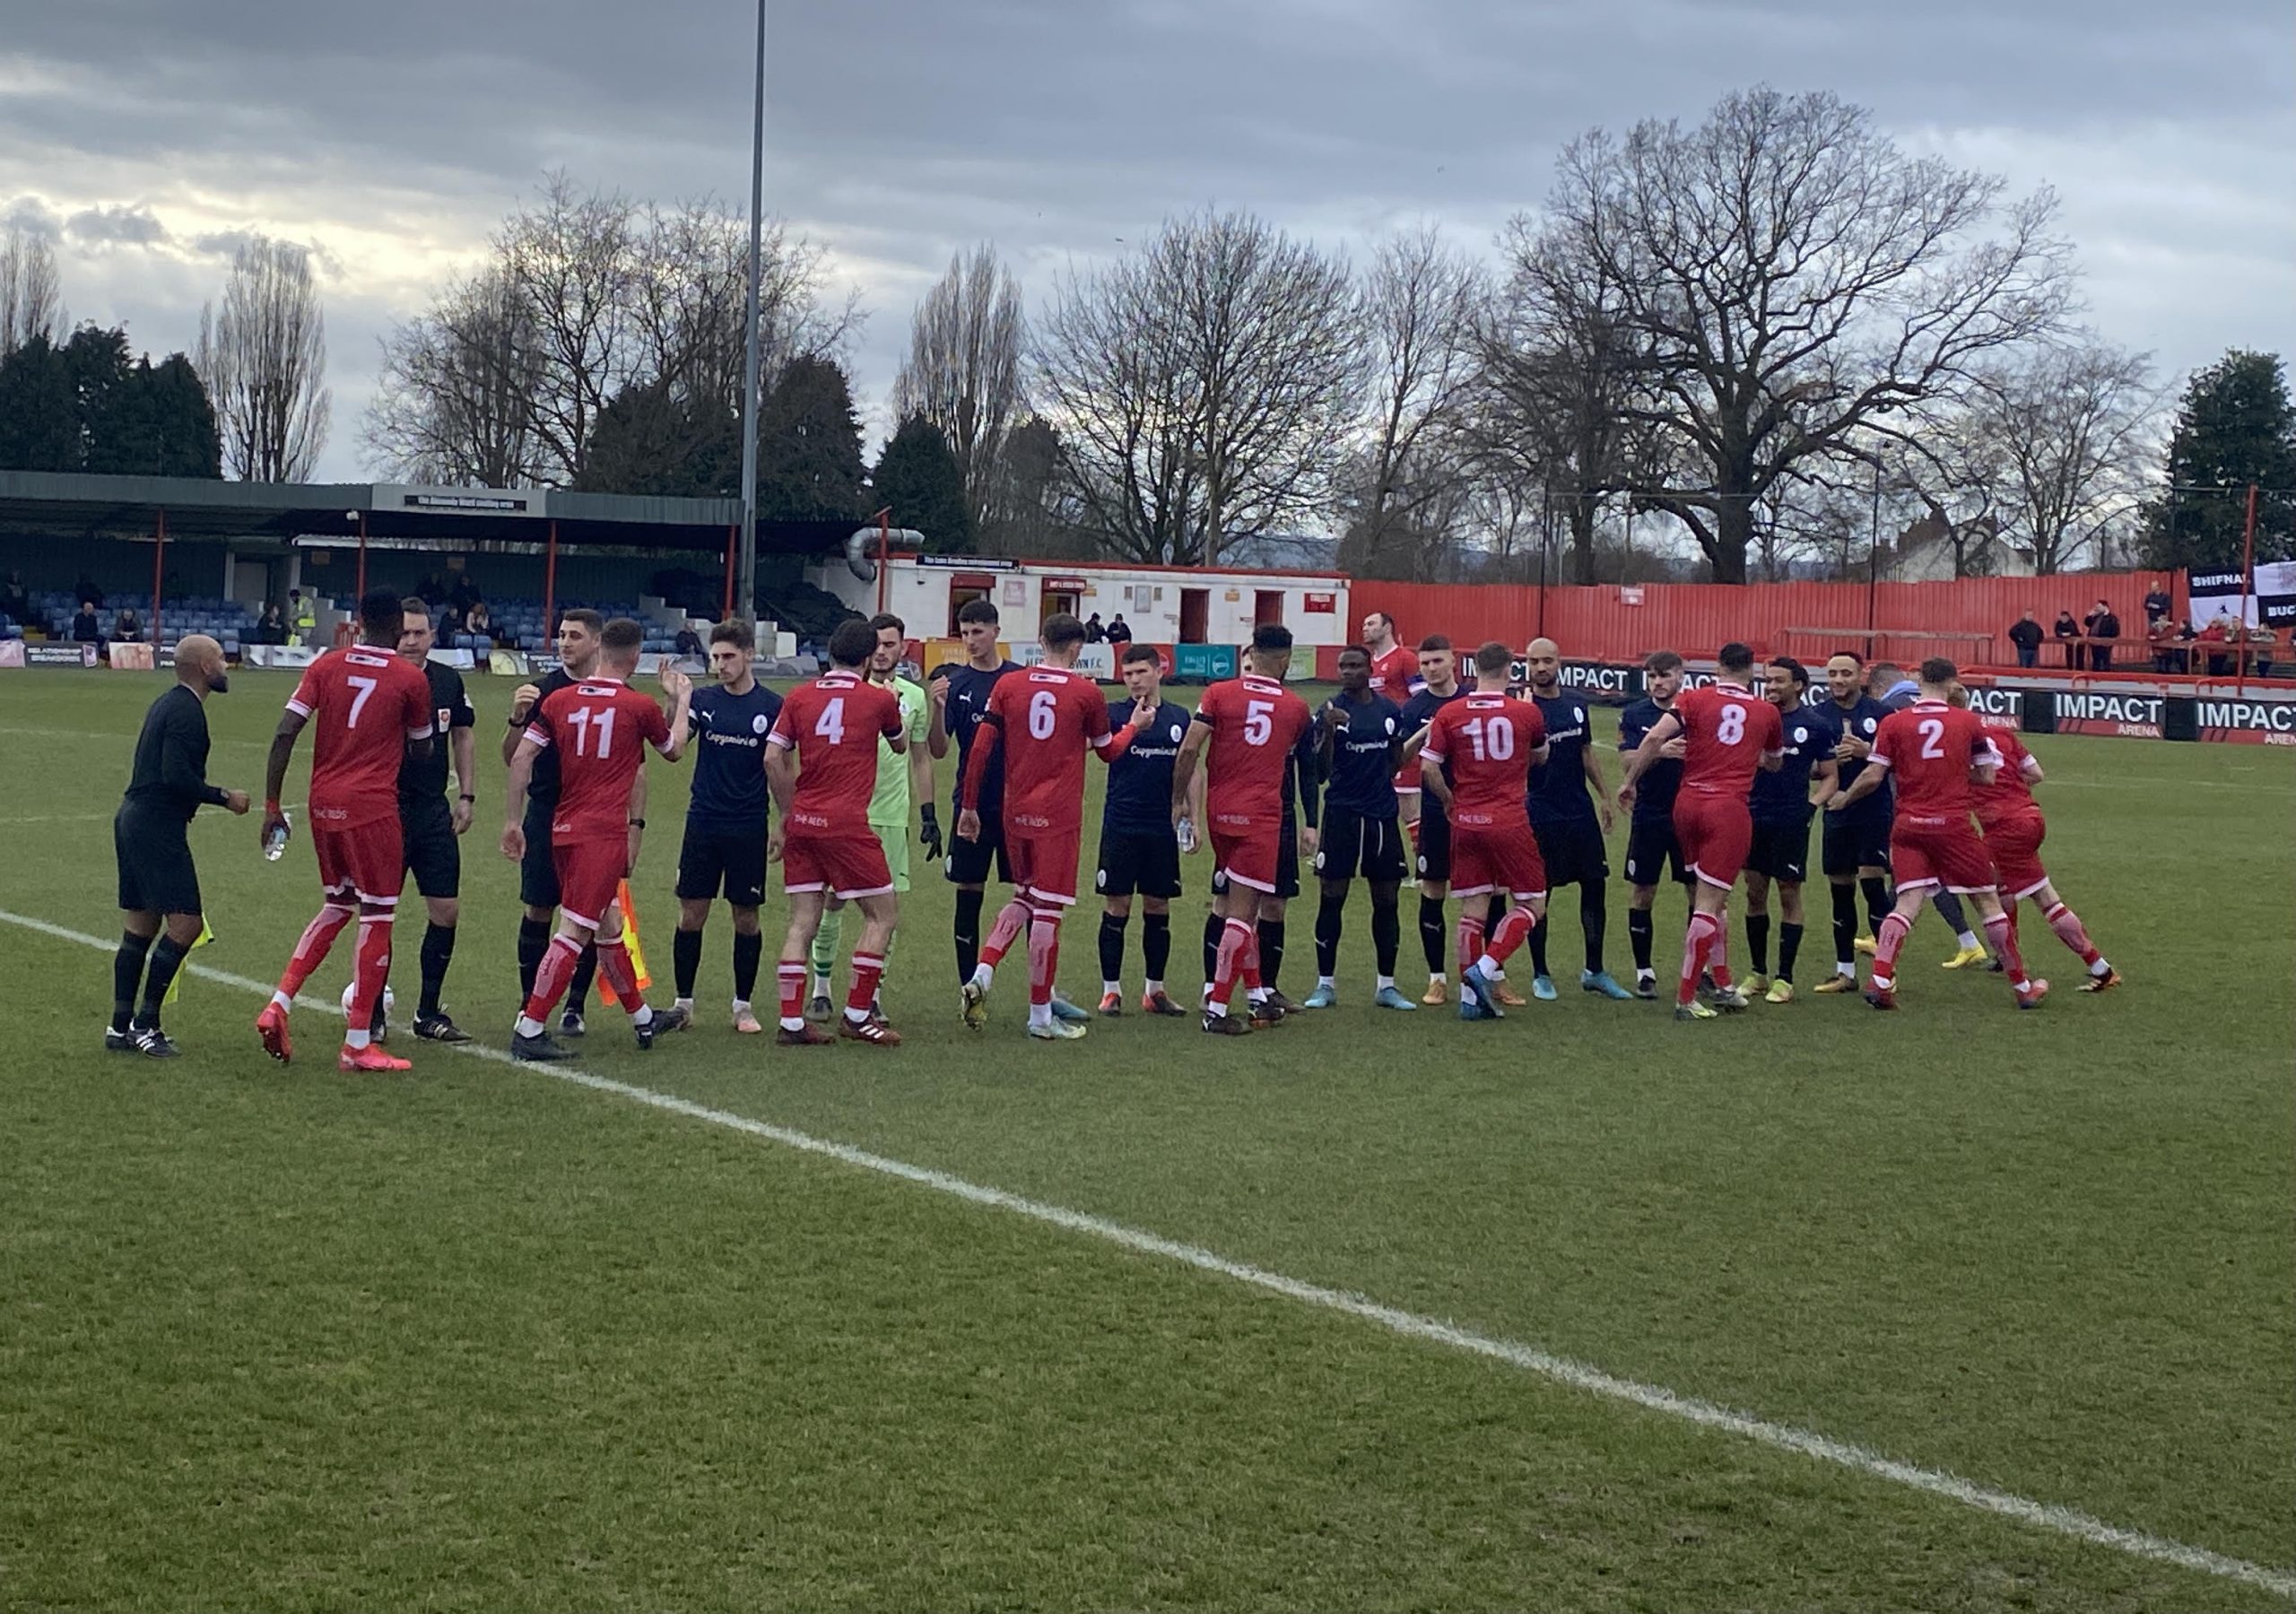 Alfreton Town FC v AFC Telford United at the Impact Arena on Saturday, February 18